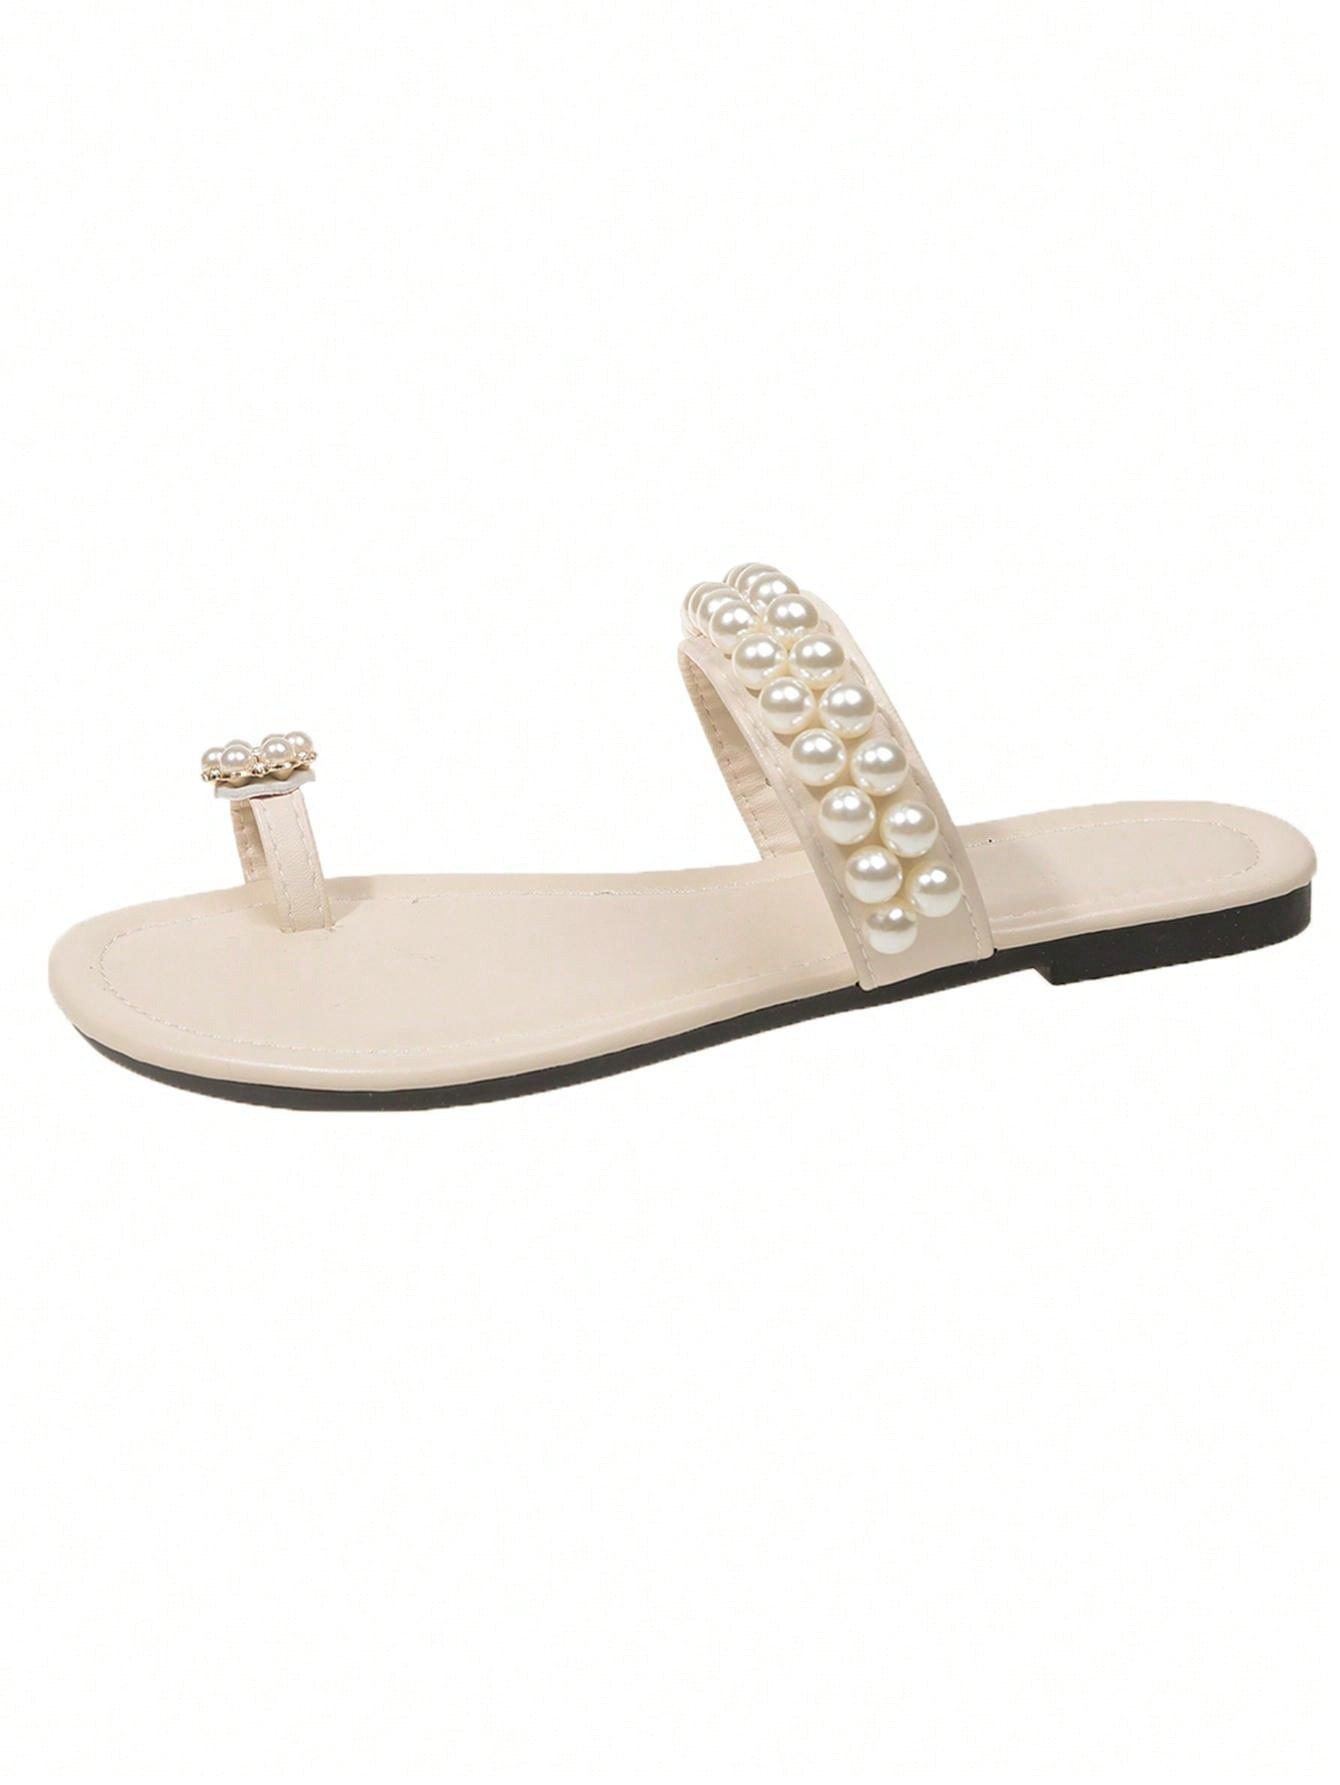 Women Flat Sandals With Pearl Rhinestone Decoration, Vacation Style Slip-On Slippers With Round Toe And Low Heel, Elegant Flat Slippers-Beige-11